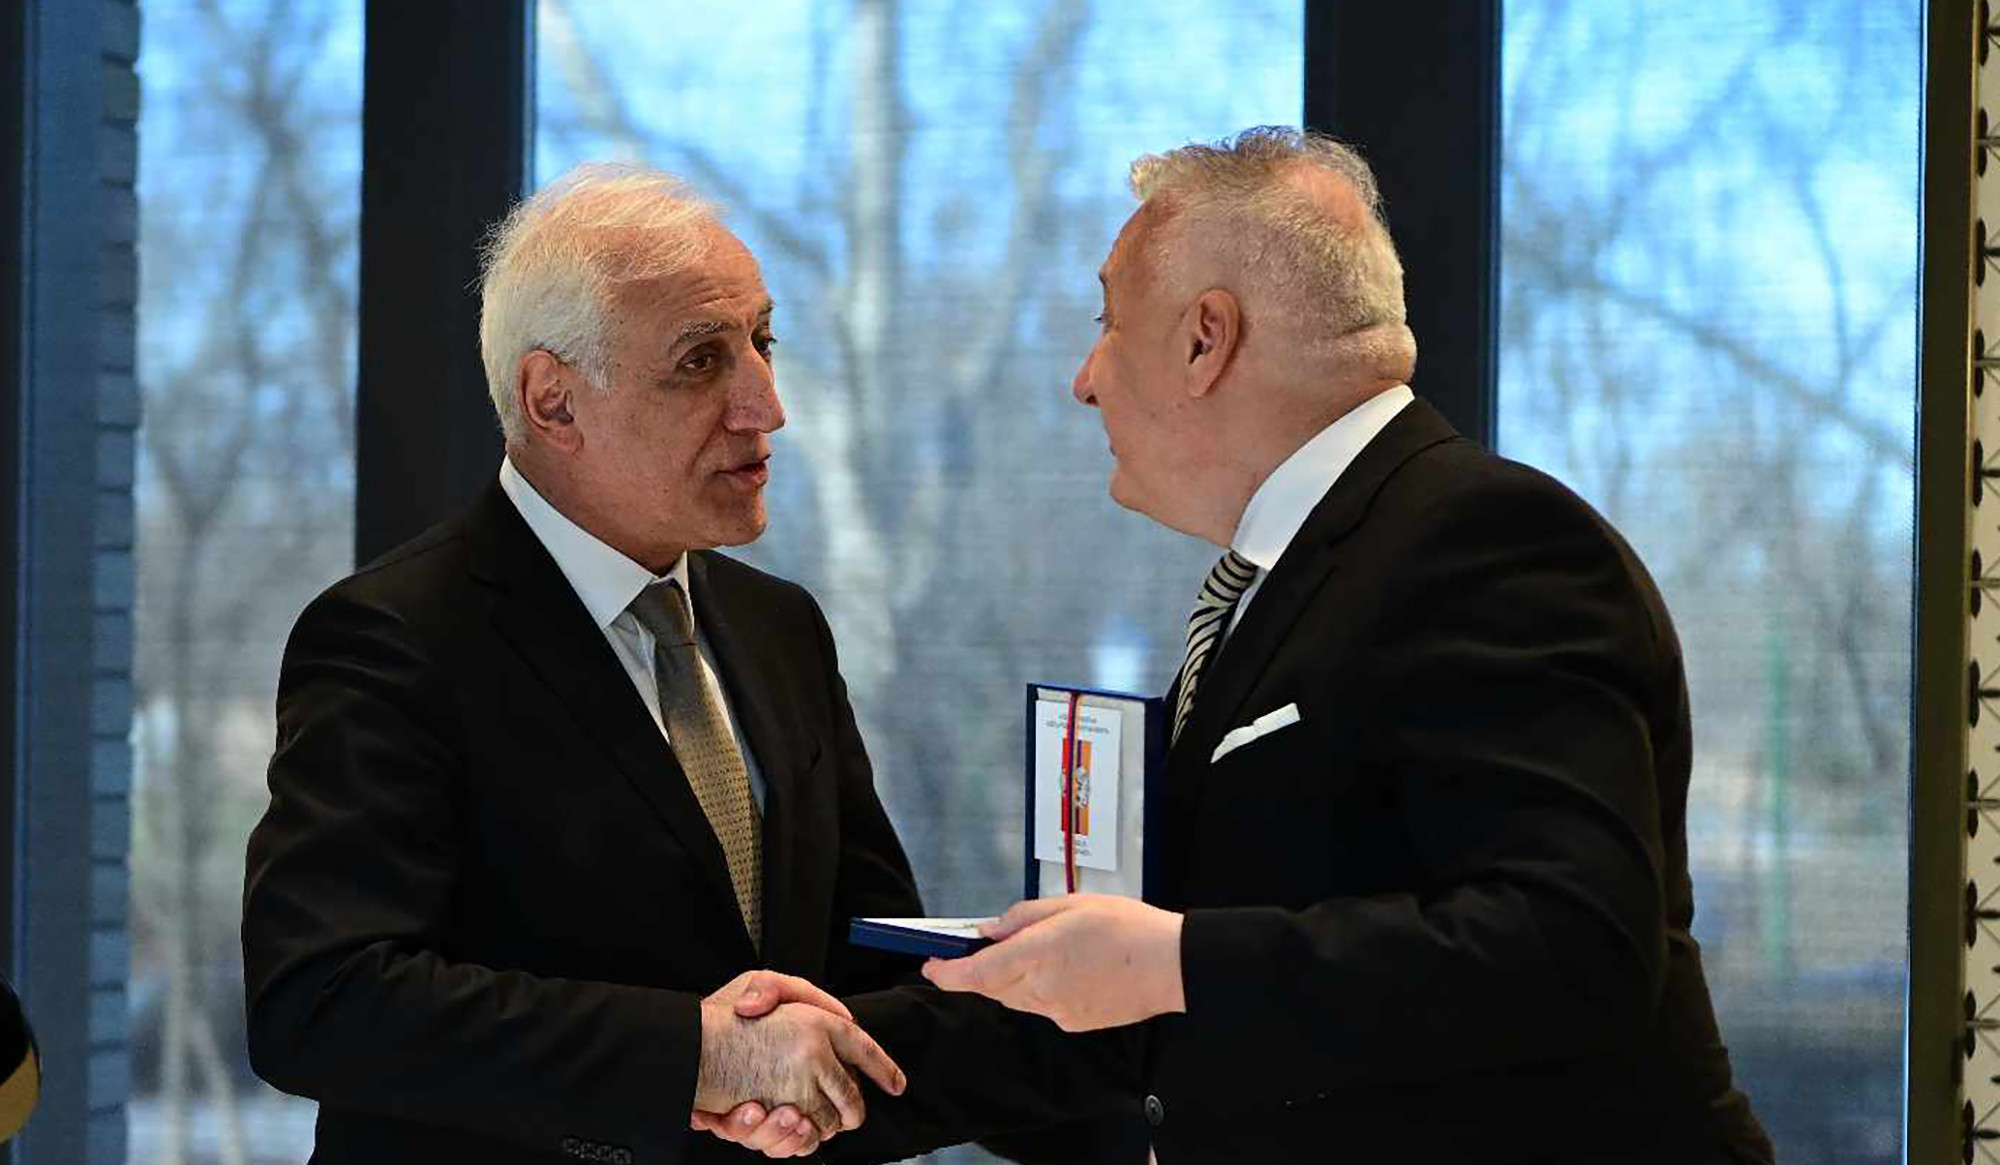 In honor of President Vahagn Khachaturyan, who is on an official visit to Hungary, an official dinner was given on behalf of Hungarian President Catalin Novák